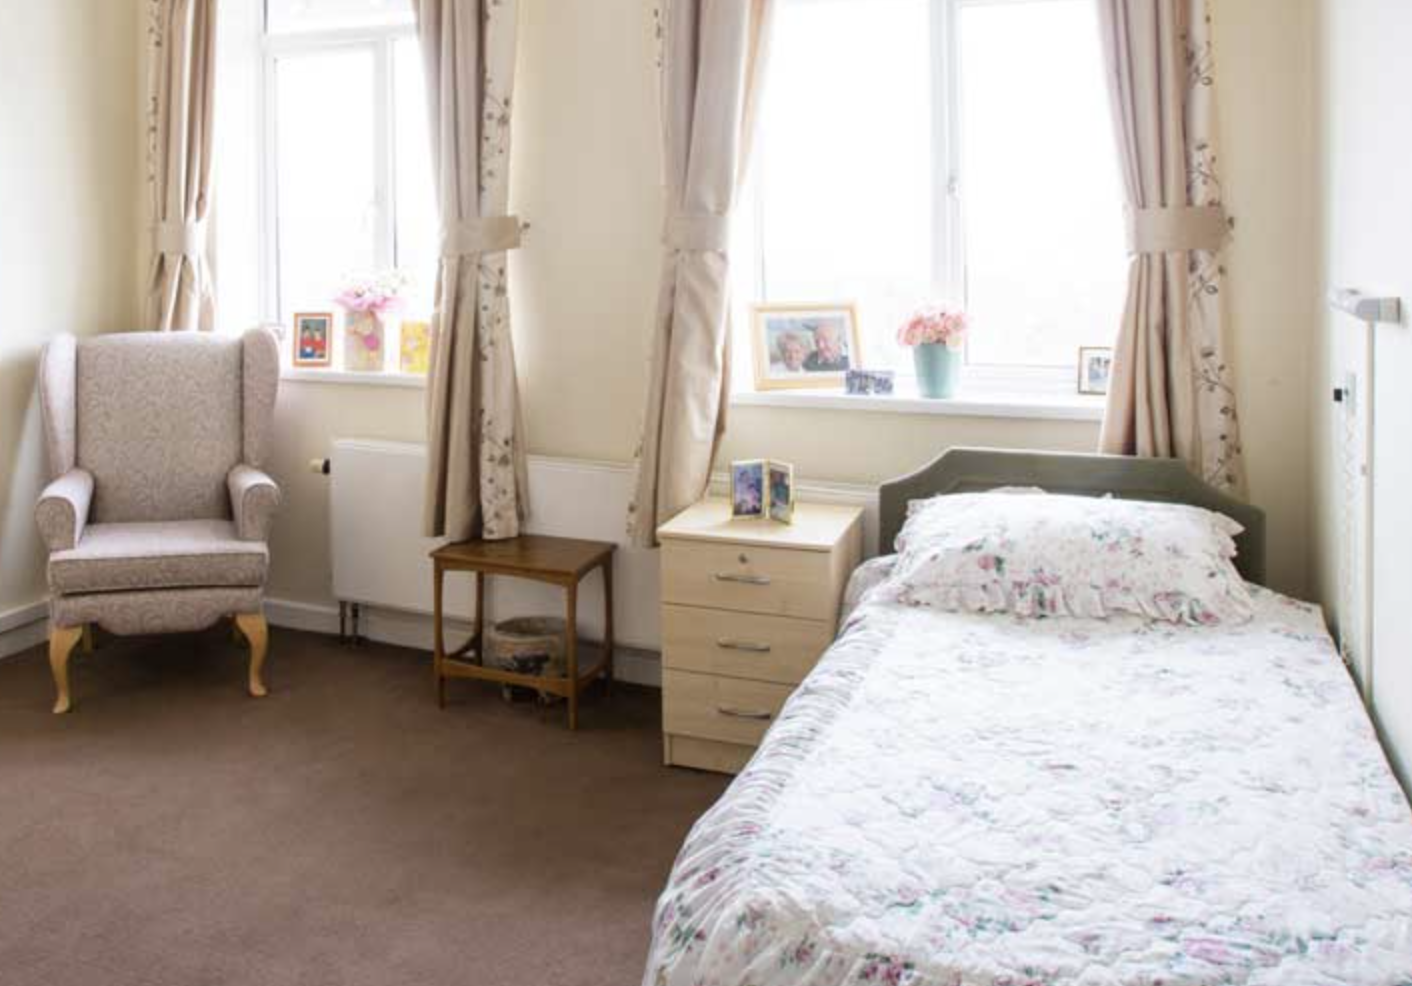 Bedroom of Brynfield Manor care home in Swansea, Wales